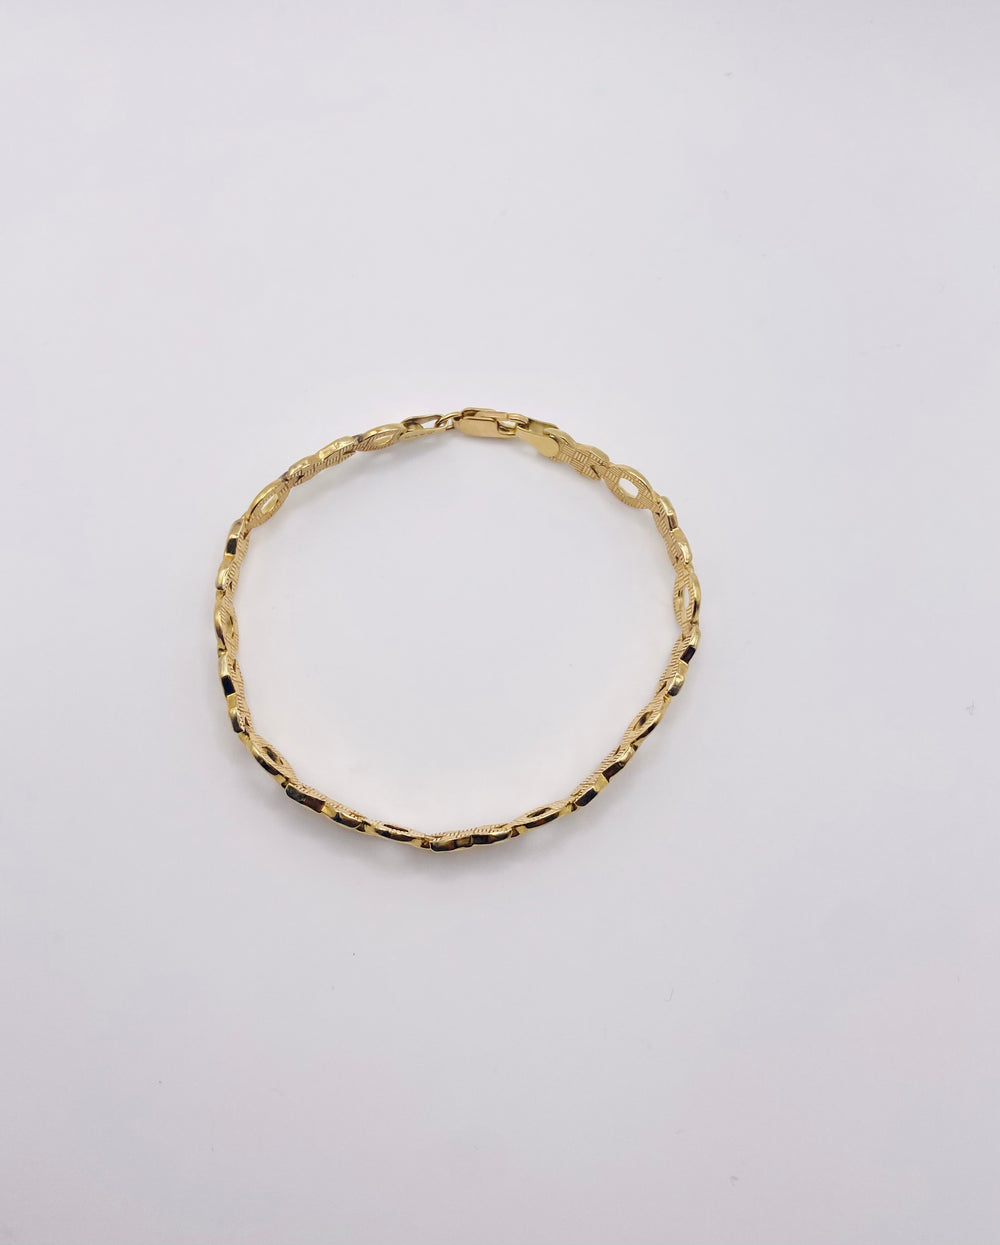 Real 10KT Gold Ladies Bracelet 7.5 inches